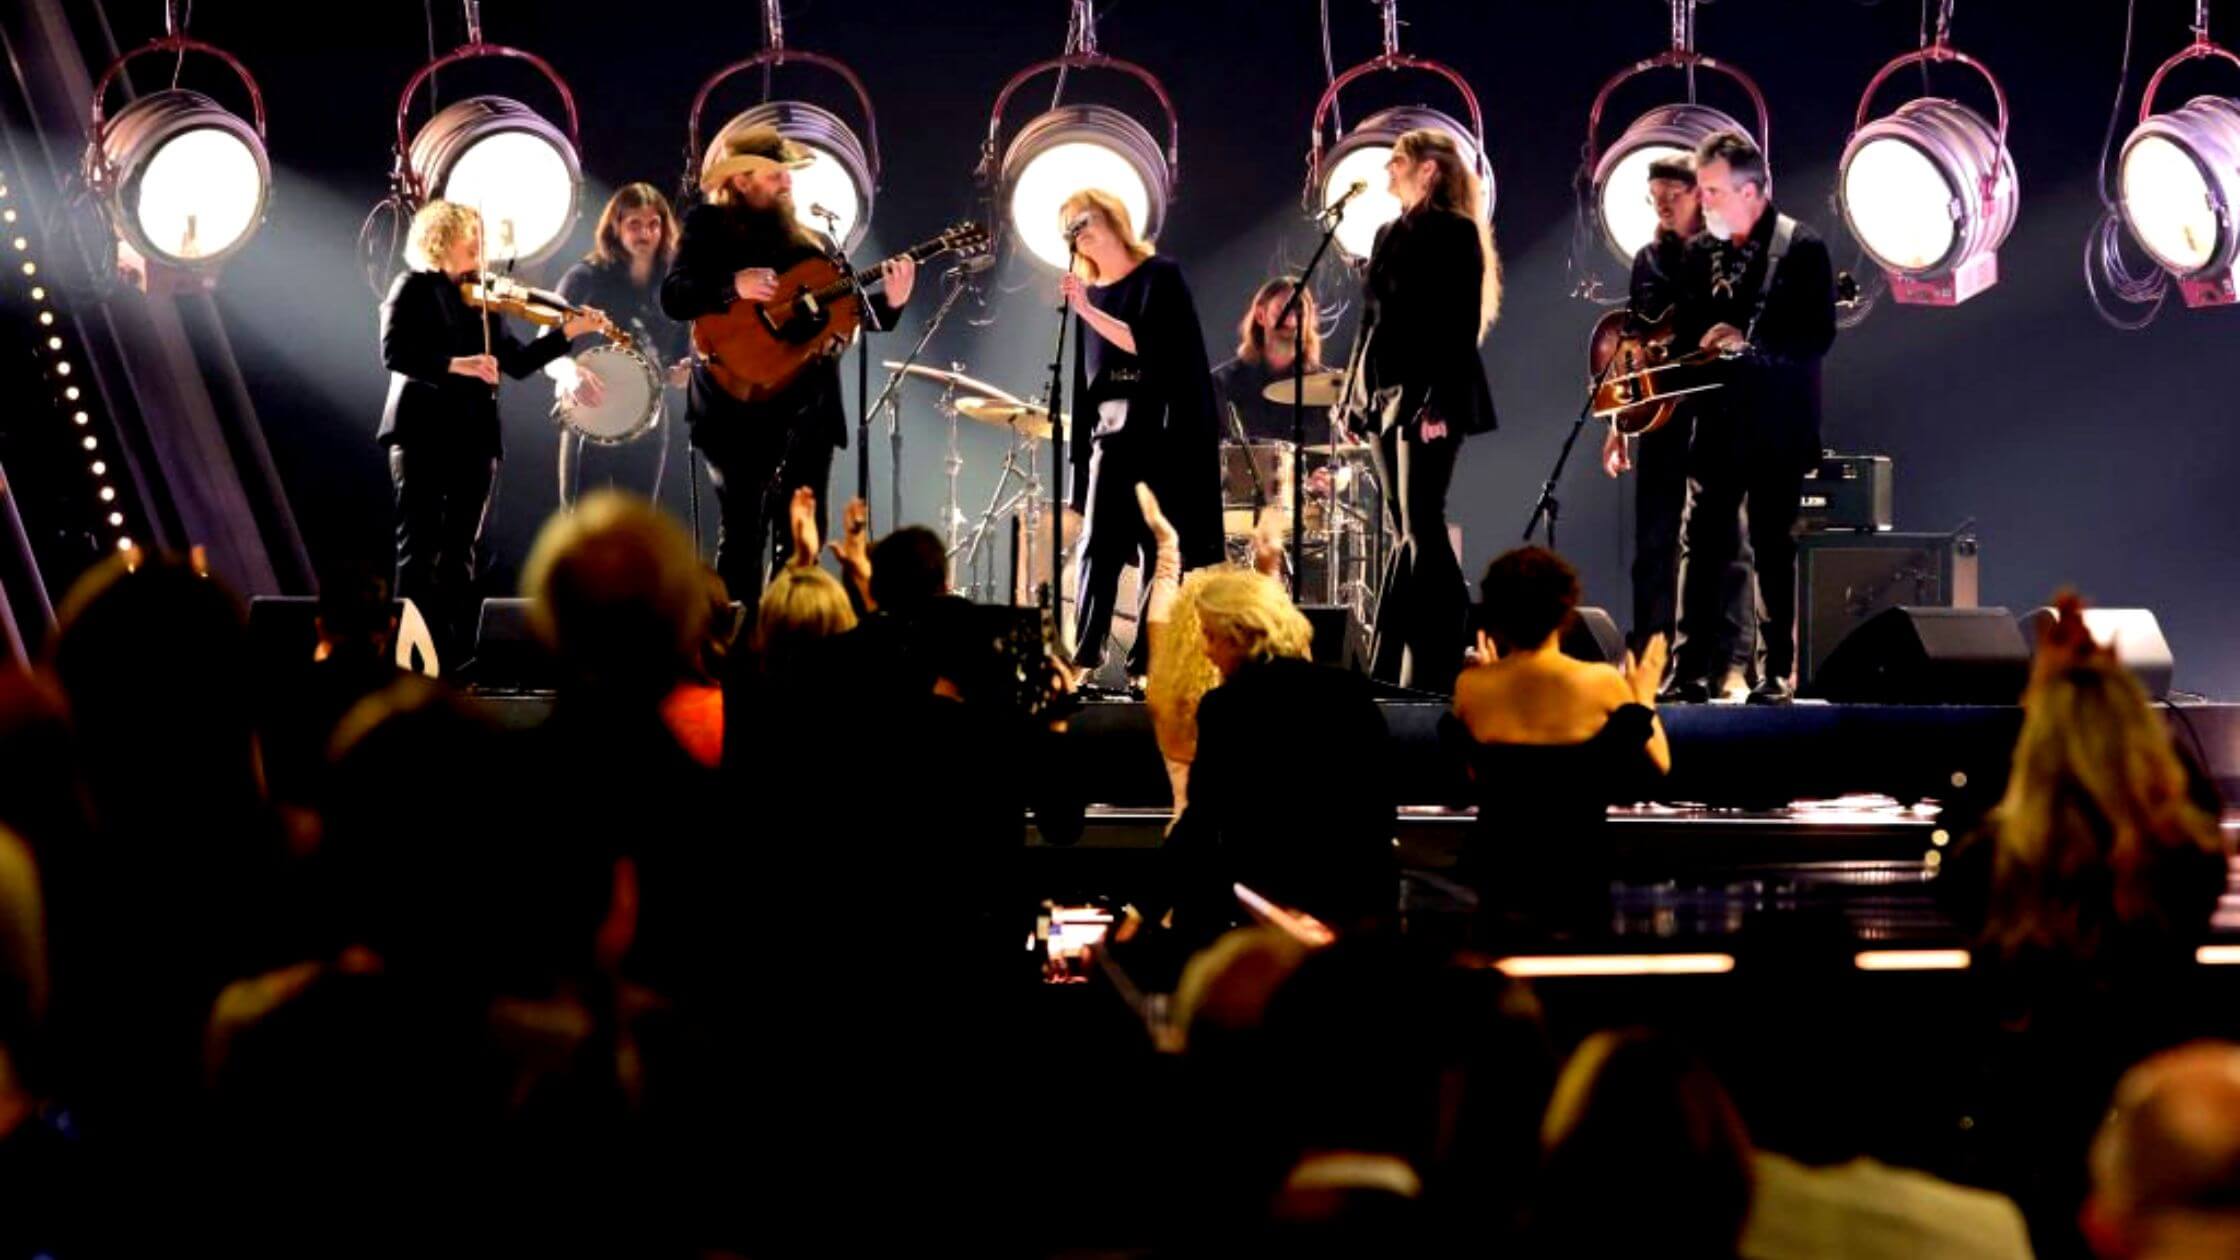 Chris Stapleton And Patty Loveless Perform Together At The CMA Awards